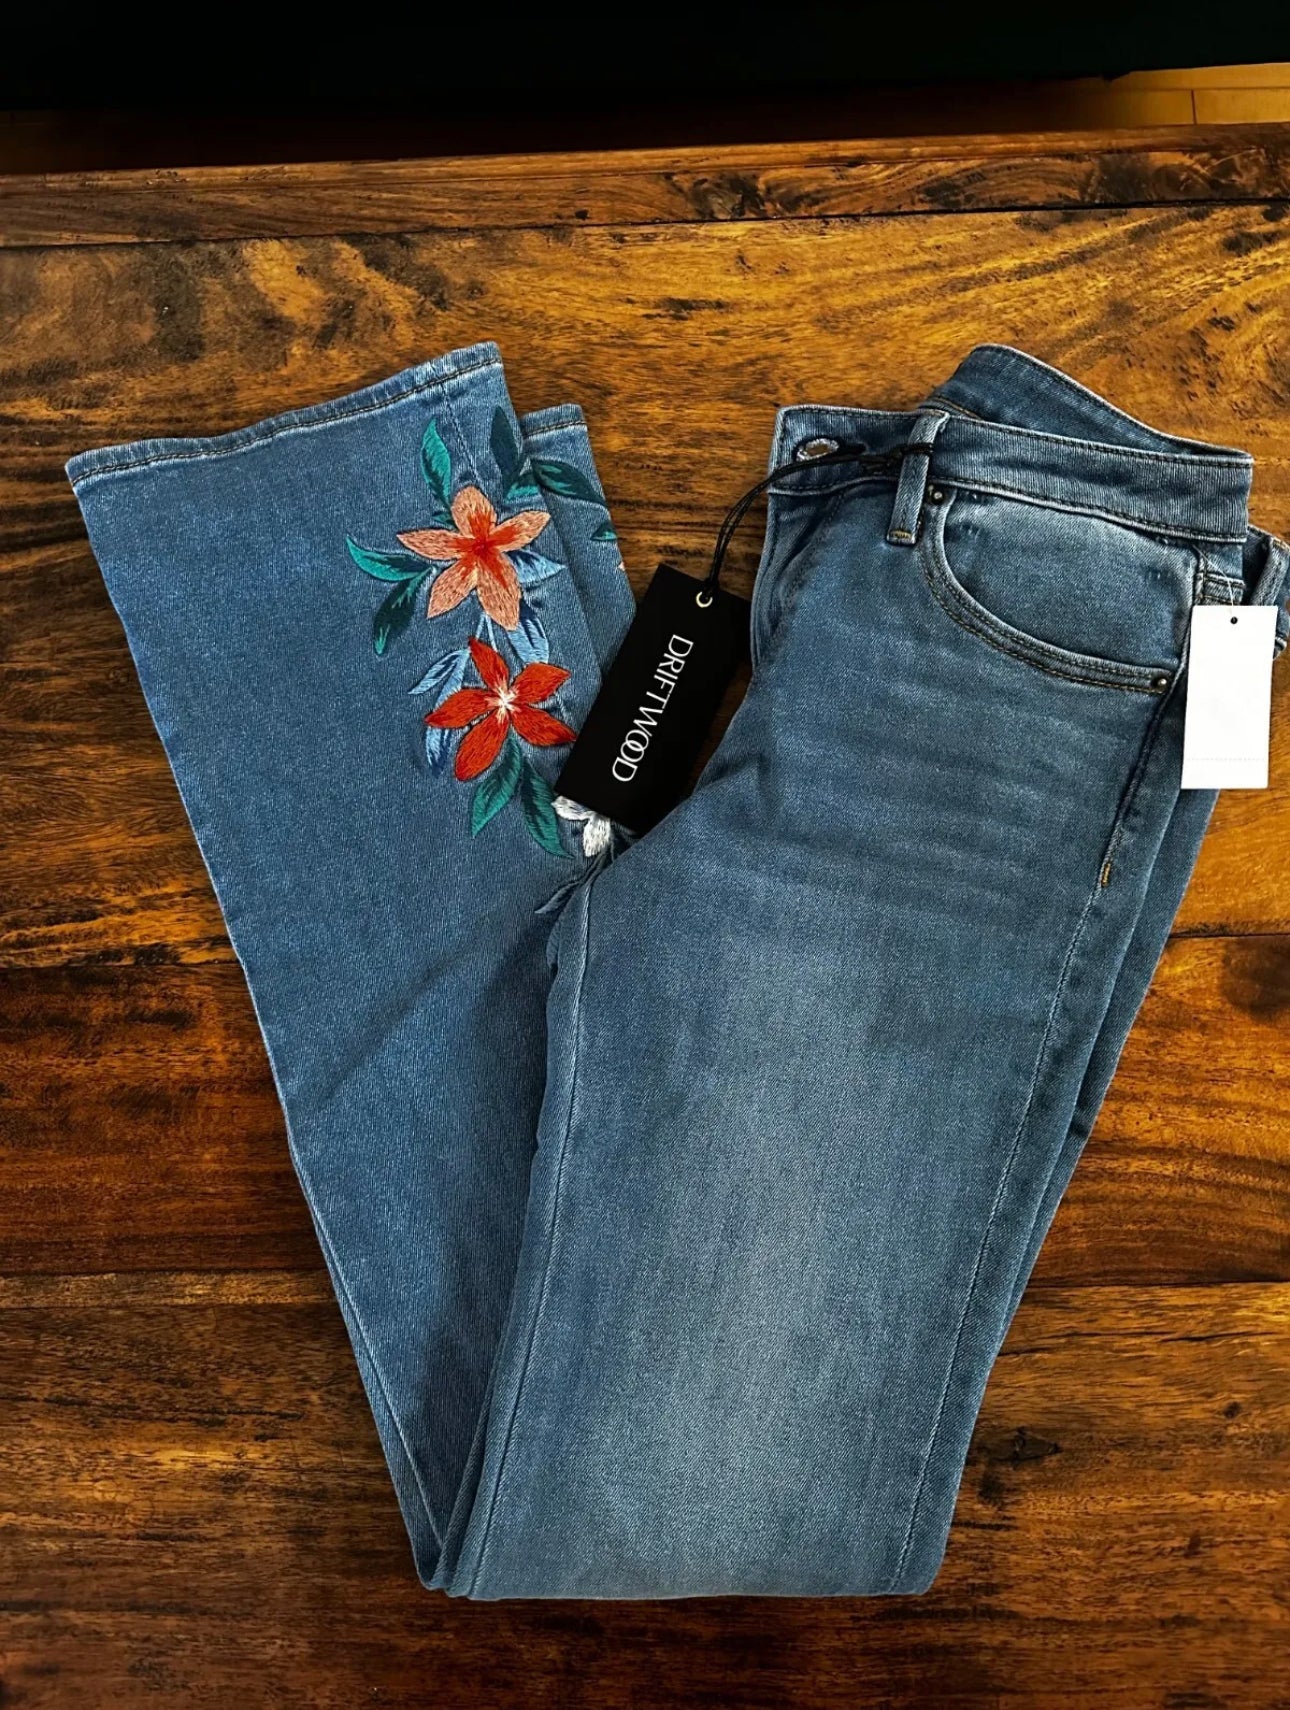 Driftwood Amaryllis Kelly Embroidered Jeans 26